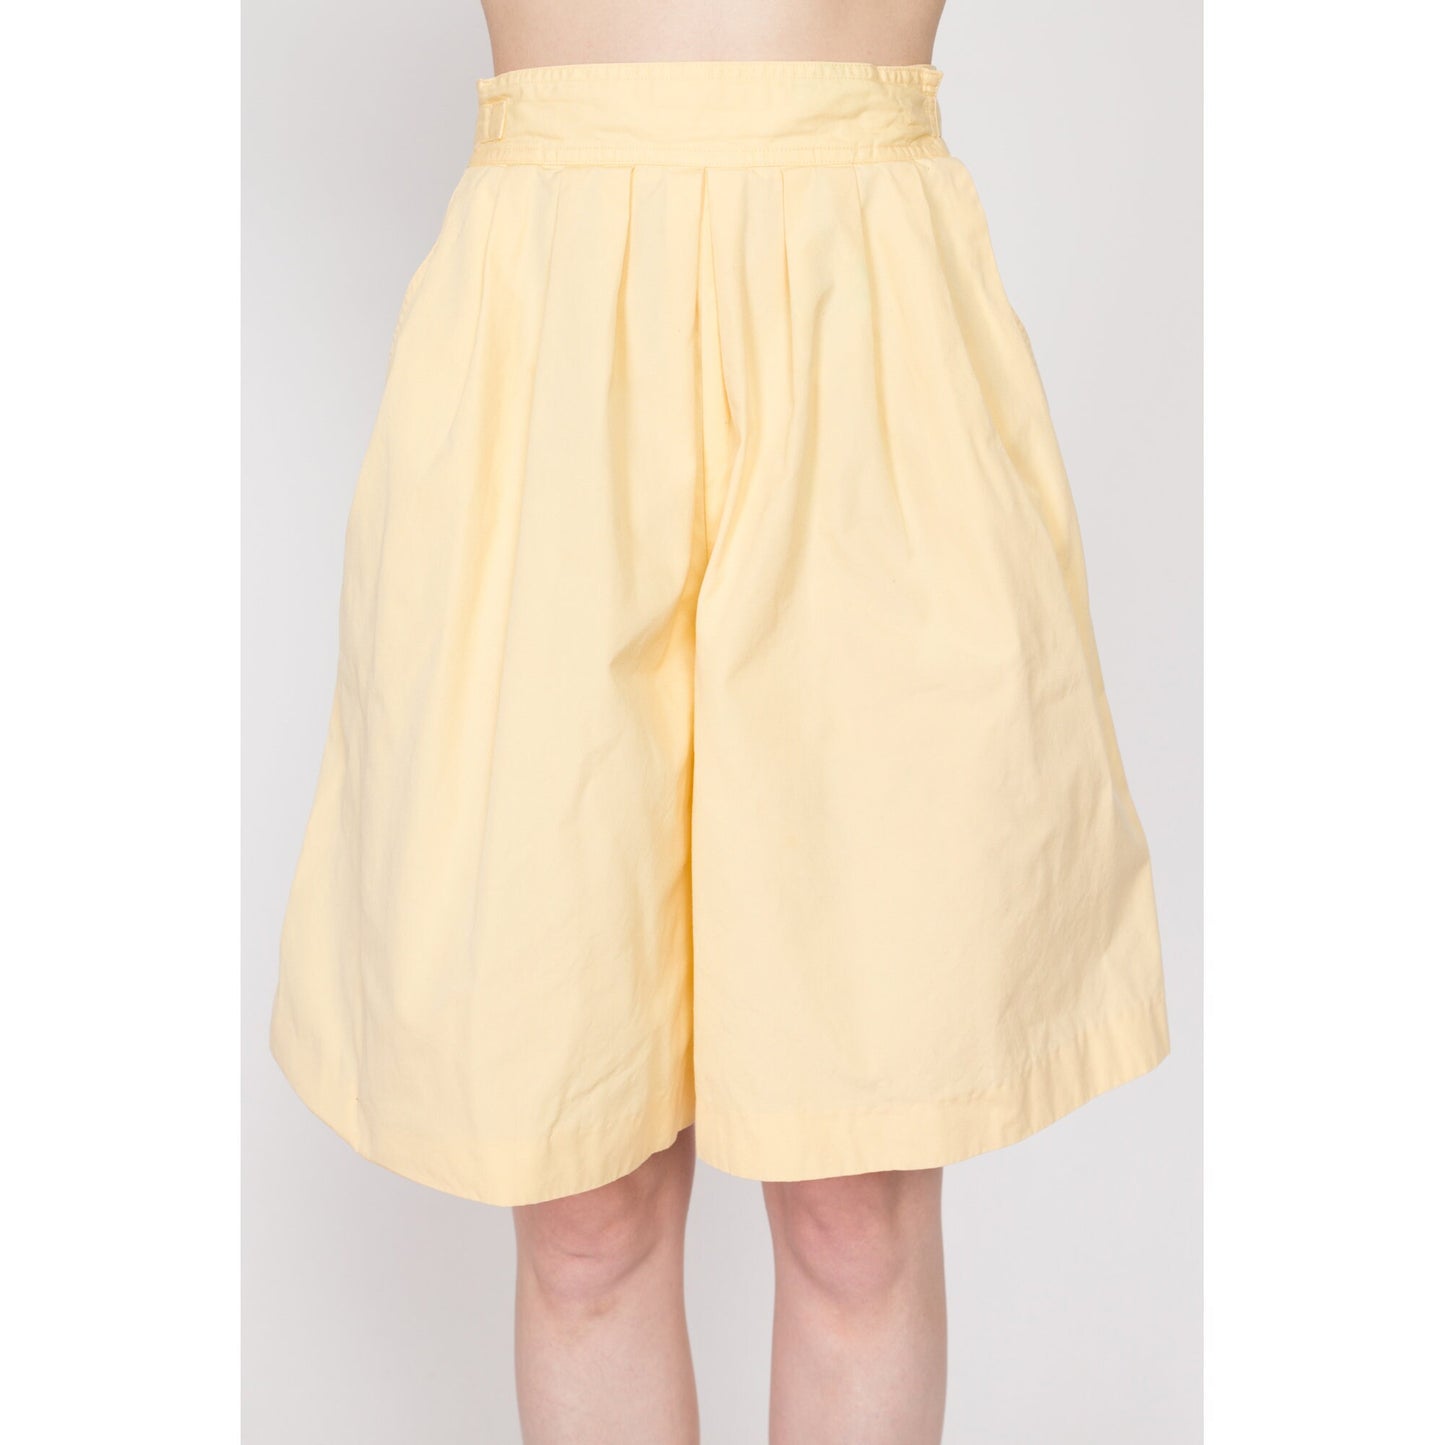 Small 80s Yellow High Waisted Wide Leg Shorts 26" | Vintage Pleated Cotton Long Inseam Mom Shorts